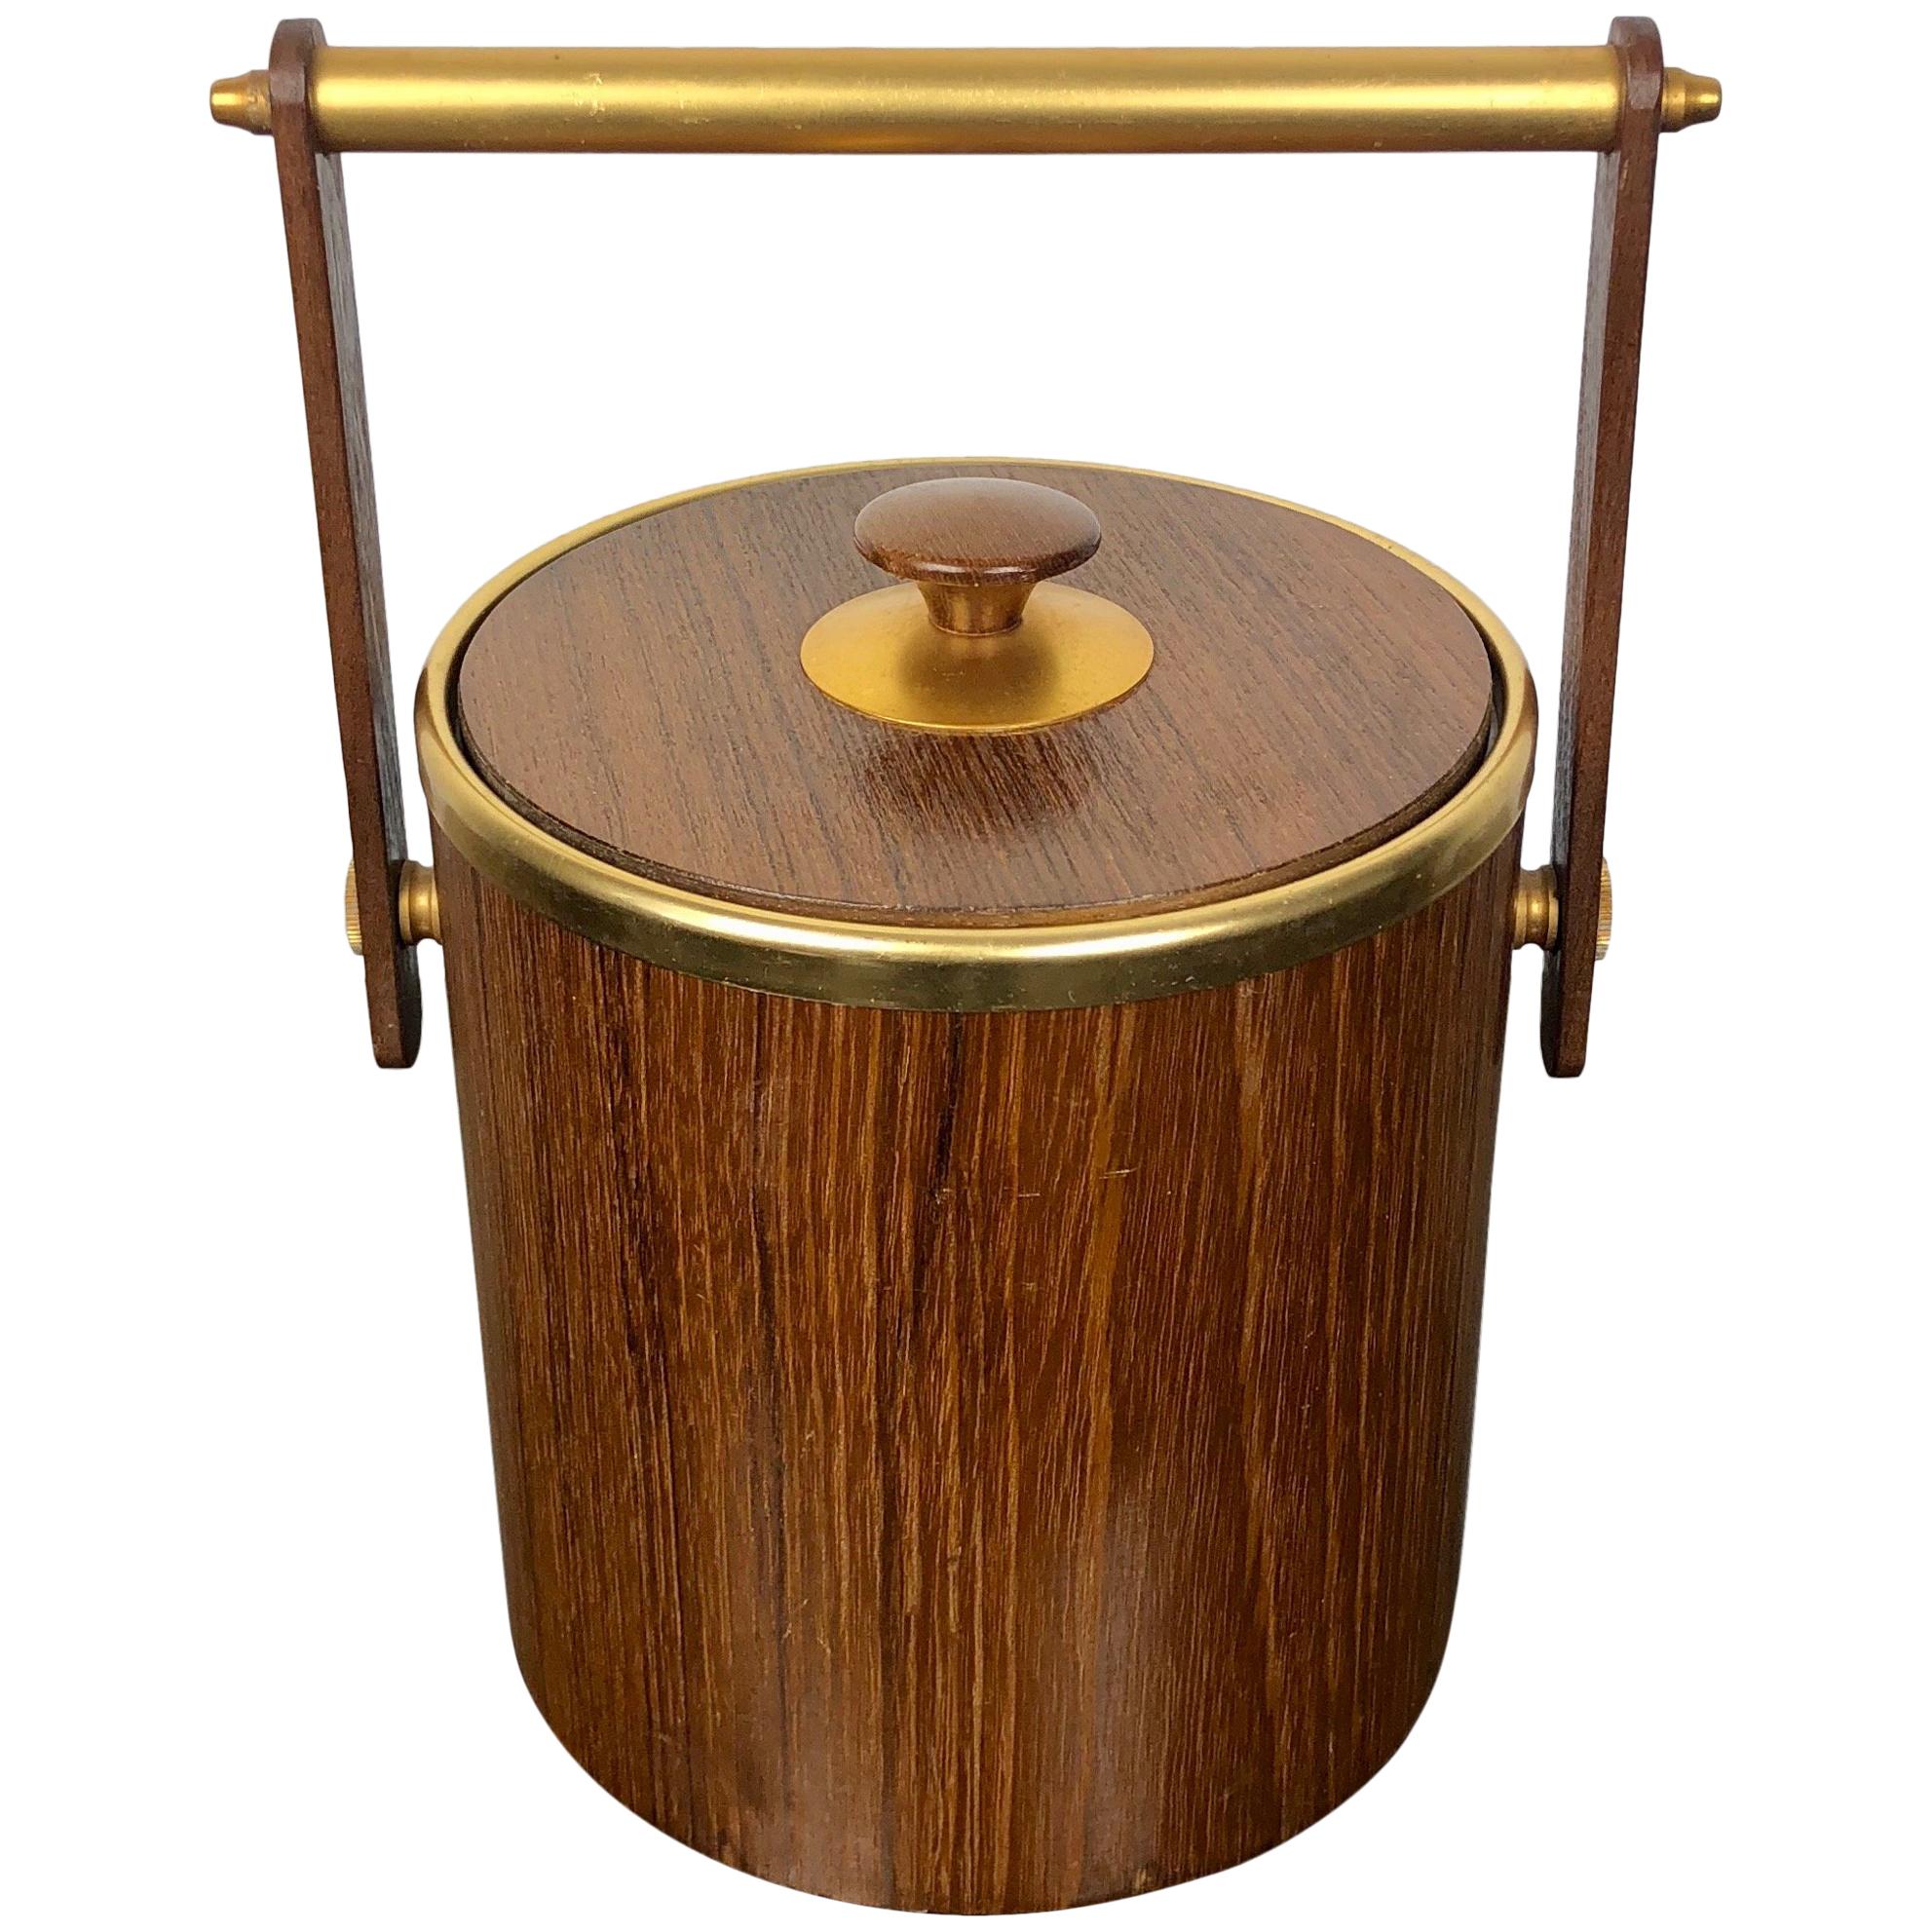 Teak and Gold Metal Ice Bucket Holder, Made in Italy, 1960s For Sale